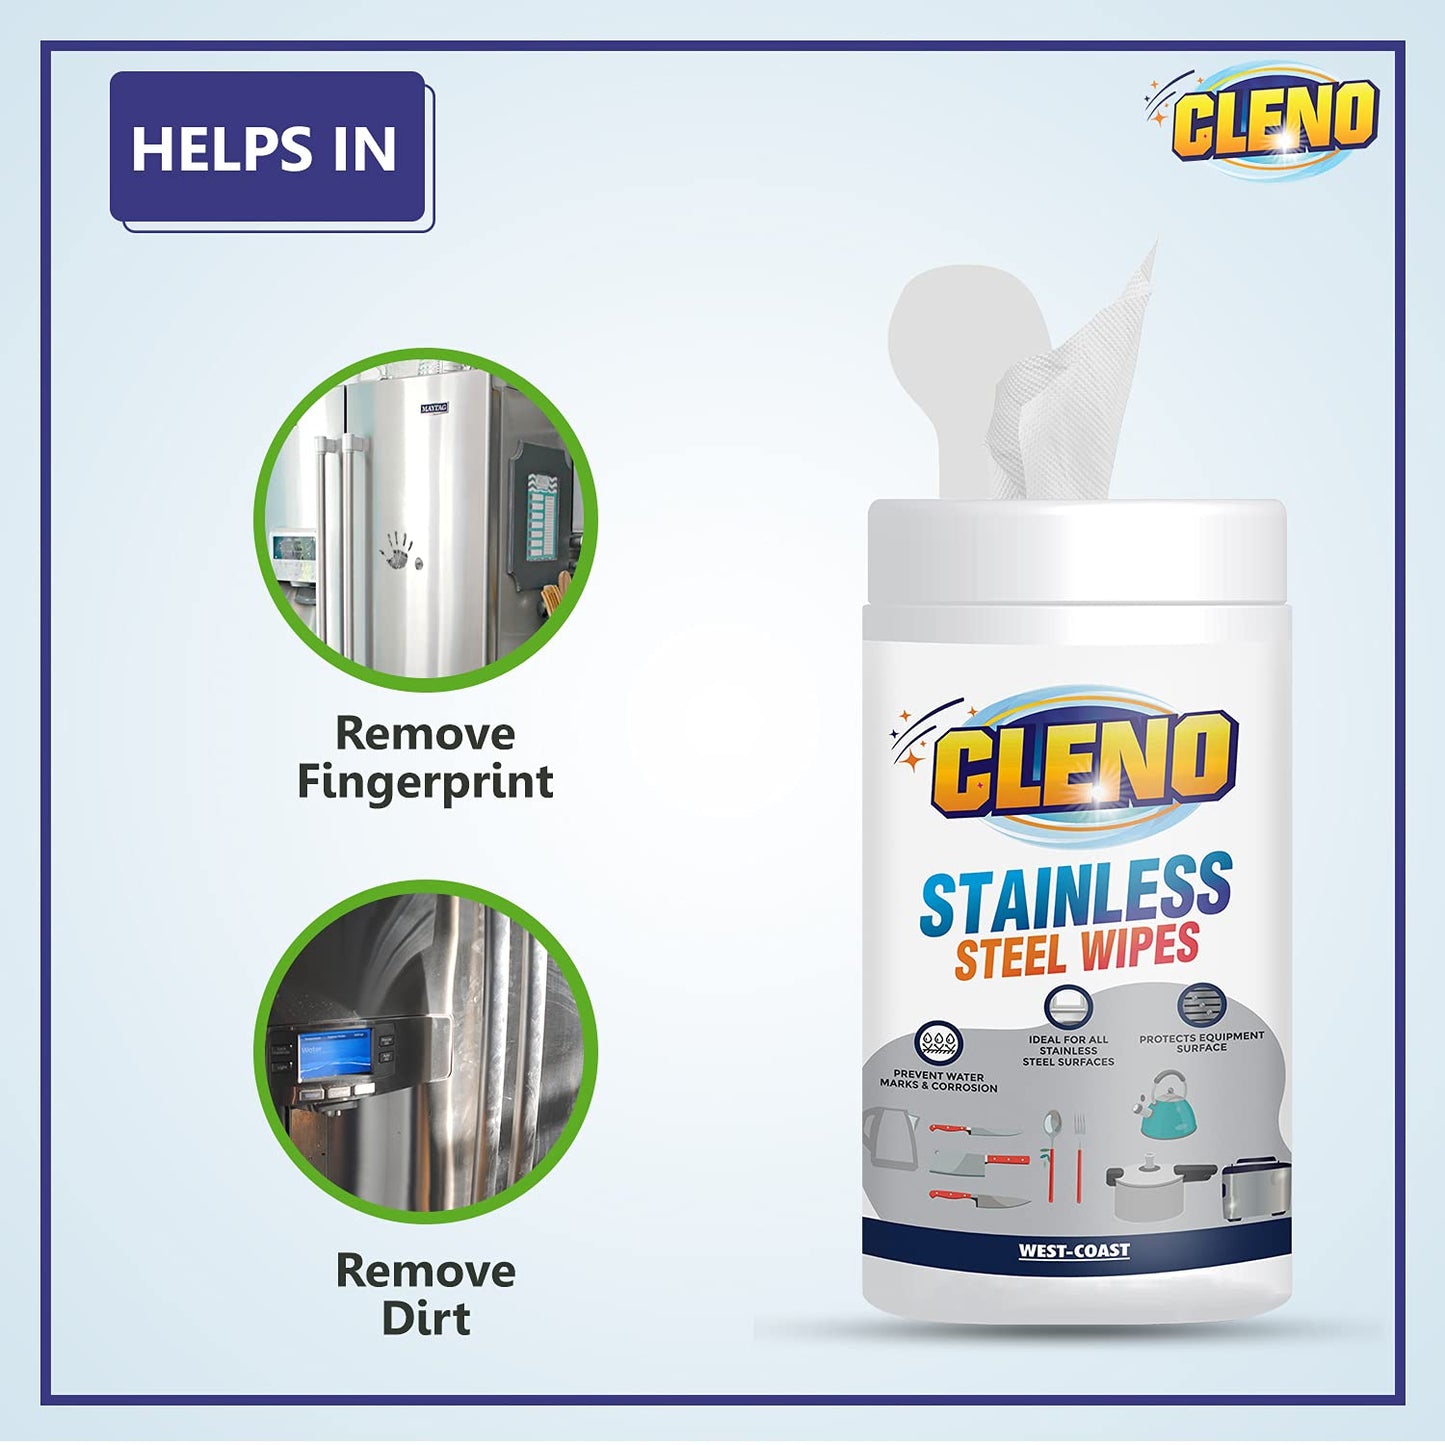 Cleno Stainless Steel Wet Wipes Quickly CleansShines  Protects CookersStoveRefrigerator Dishwashers  Grills Stainless-Steel Surfaces - 50 Wipes Pack of 3 Ready to Use